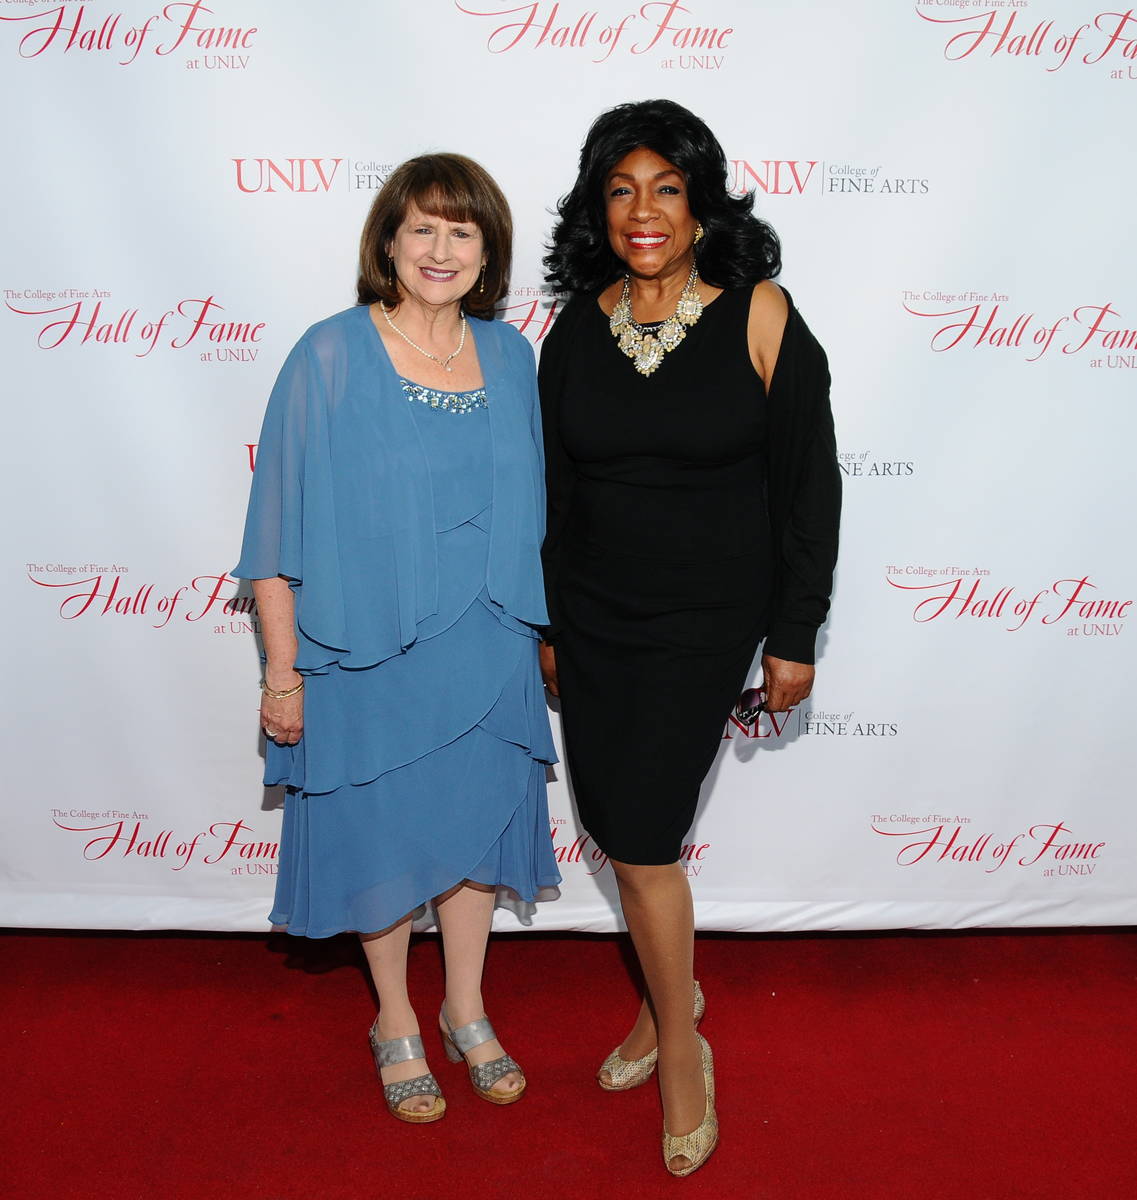 UNLV College of Fine Arts Dean Nancy Uscher is shown with Nancy Wilson on the red carpet of the ...